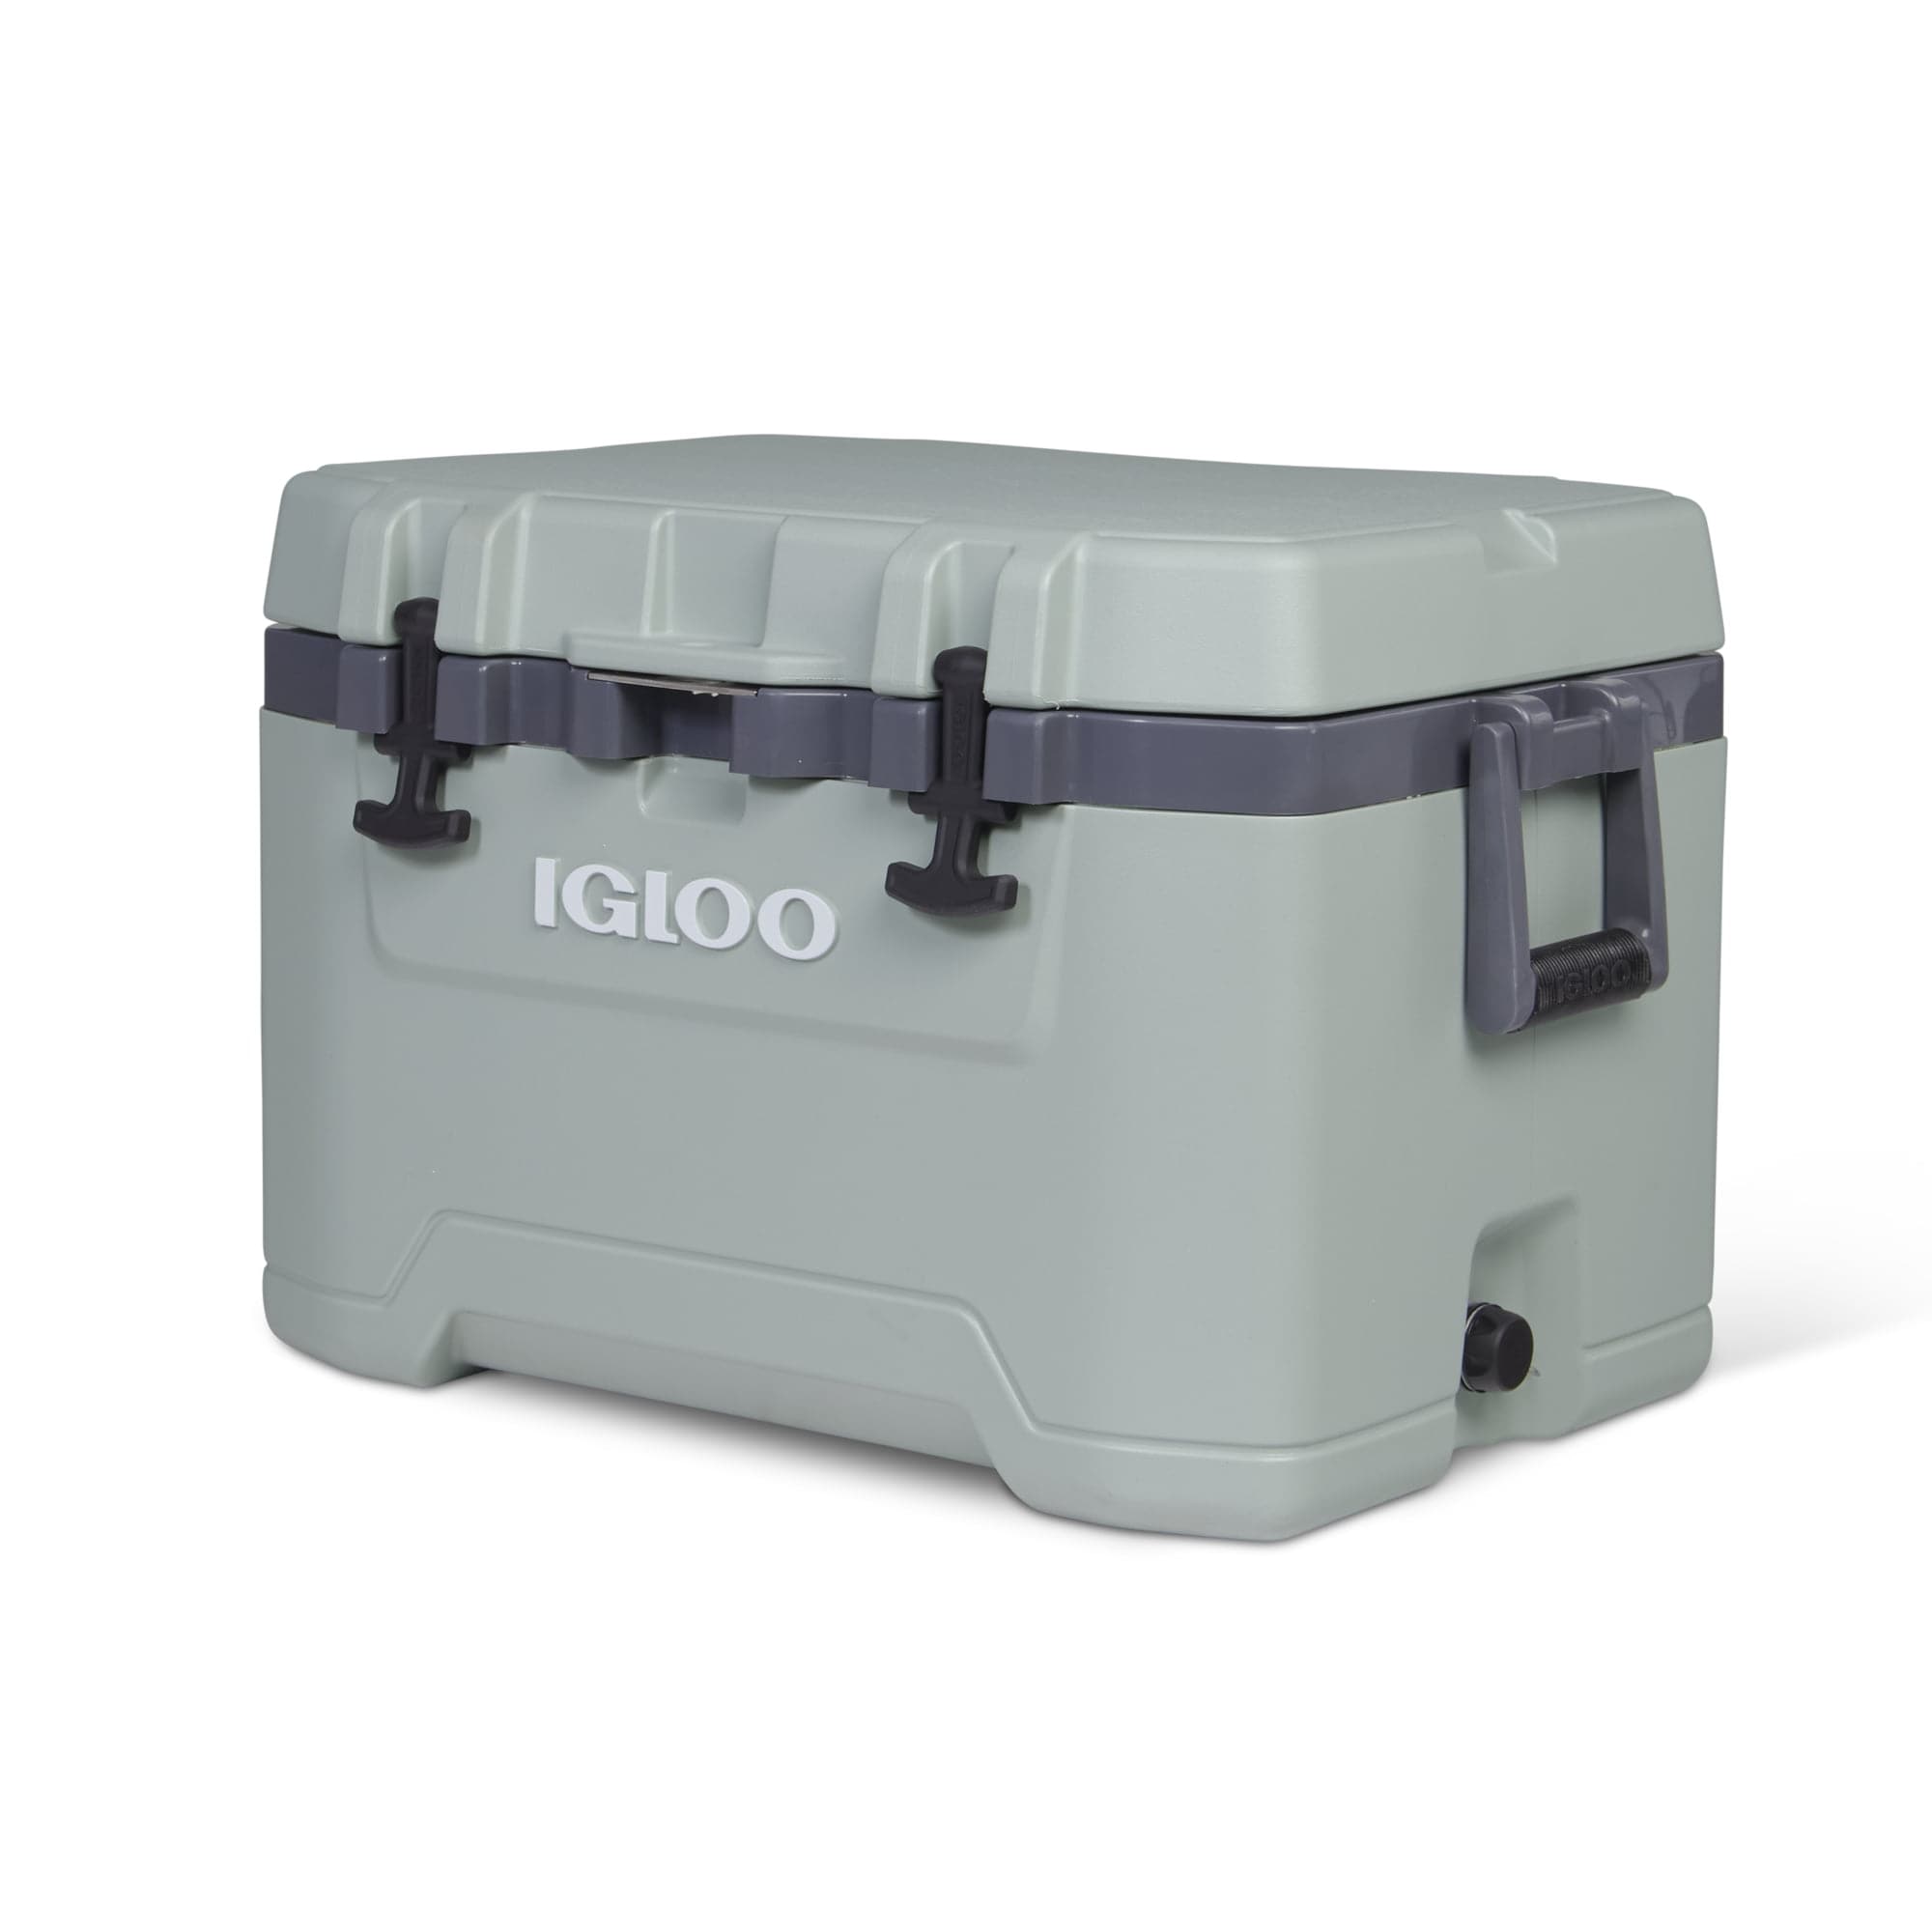 https://ak1.ostkcdn.com/images/products/is/images/direct/5539062ae3bc899e58929baa2c03ca36c23c89ae/Overland-Ice-Chest-Cooler%2C-Green.jpg